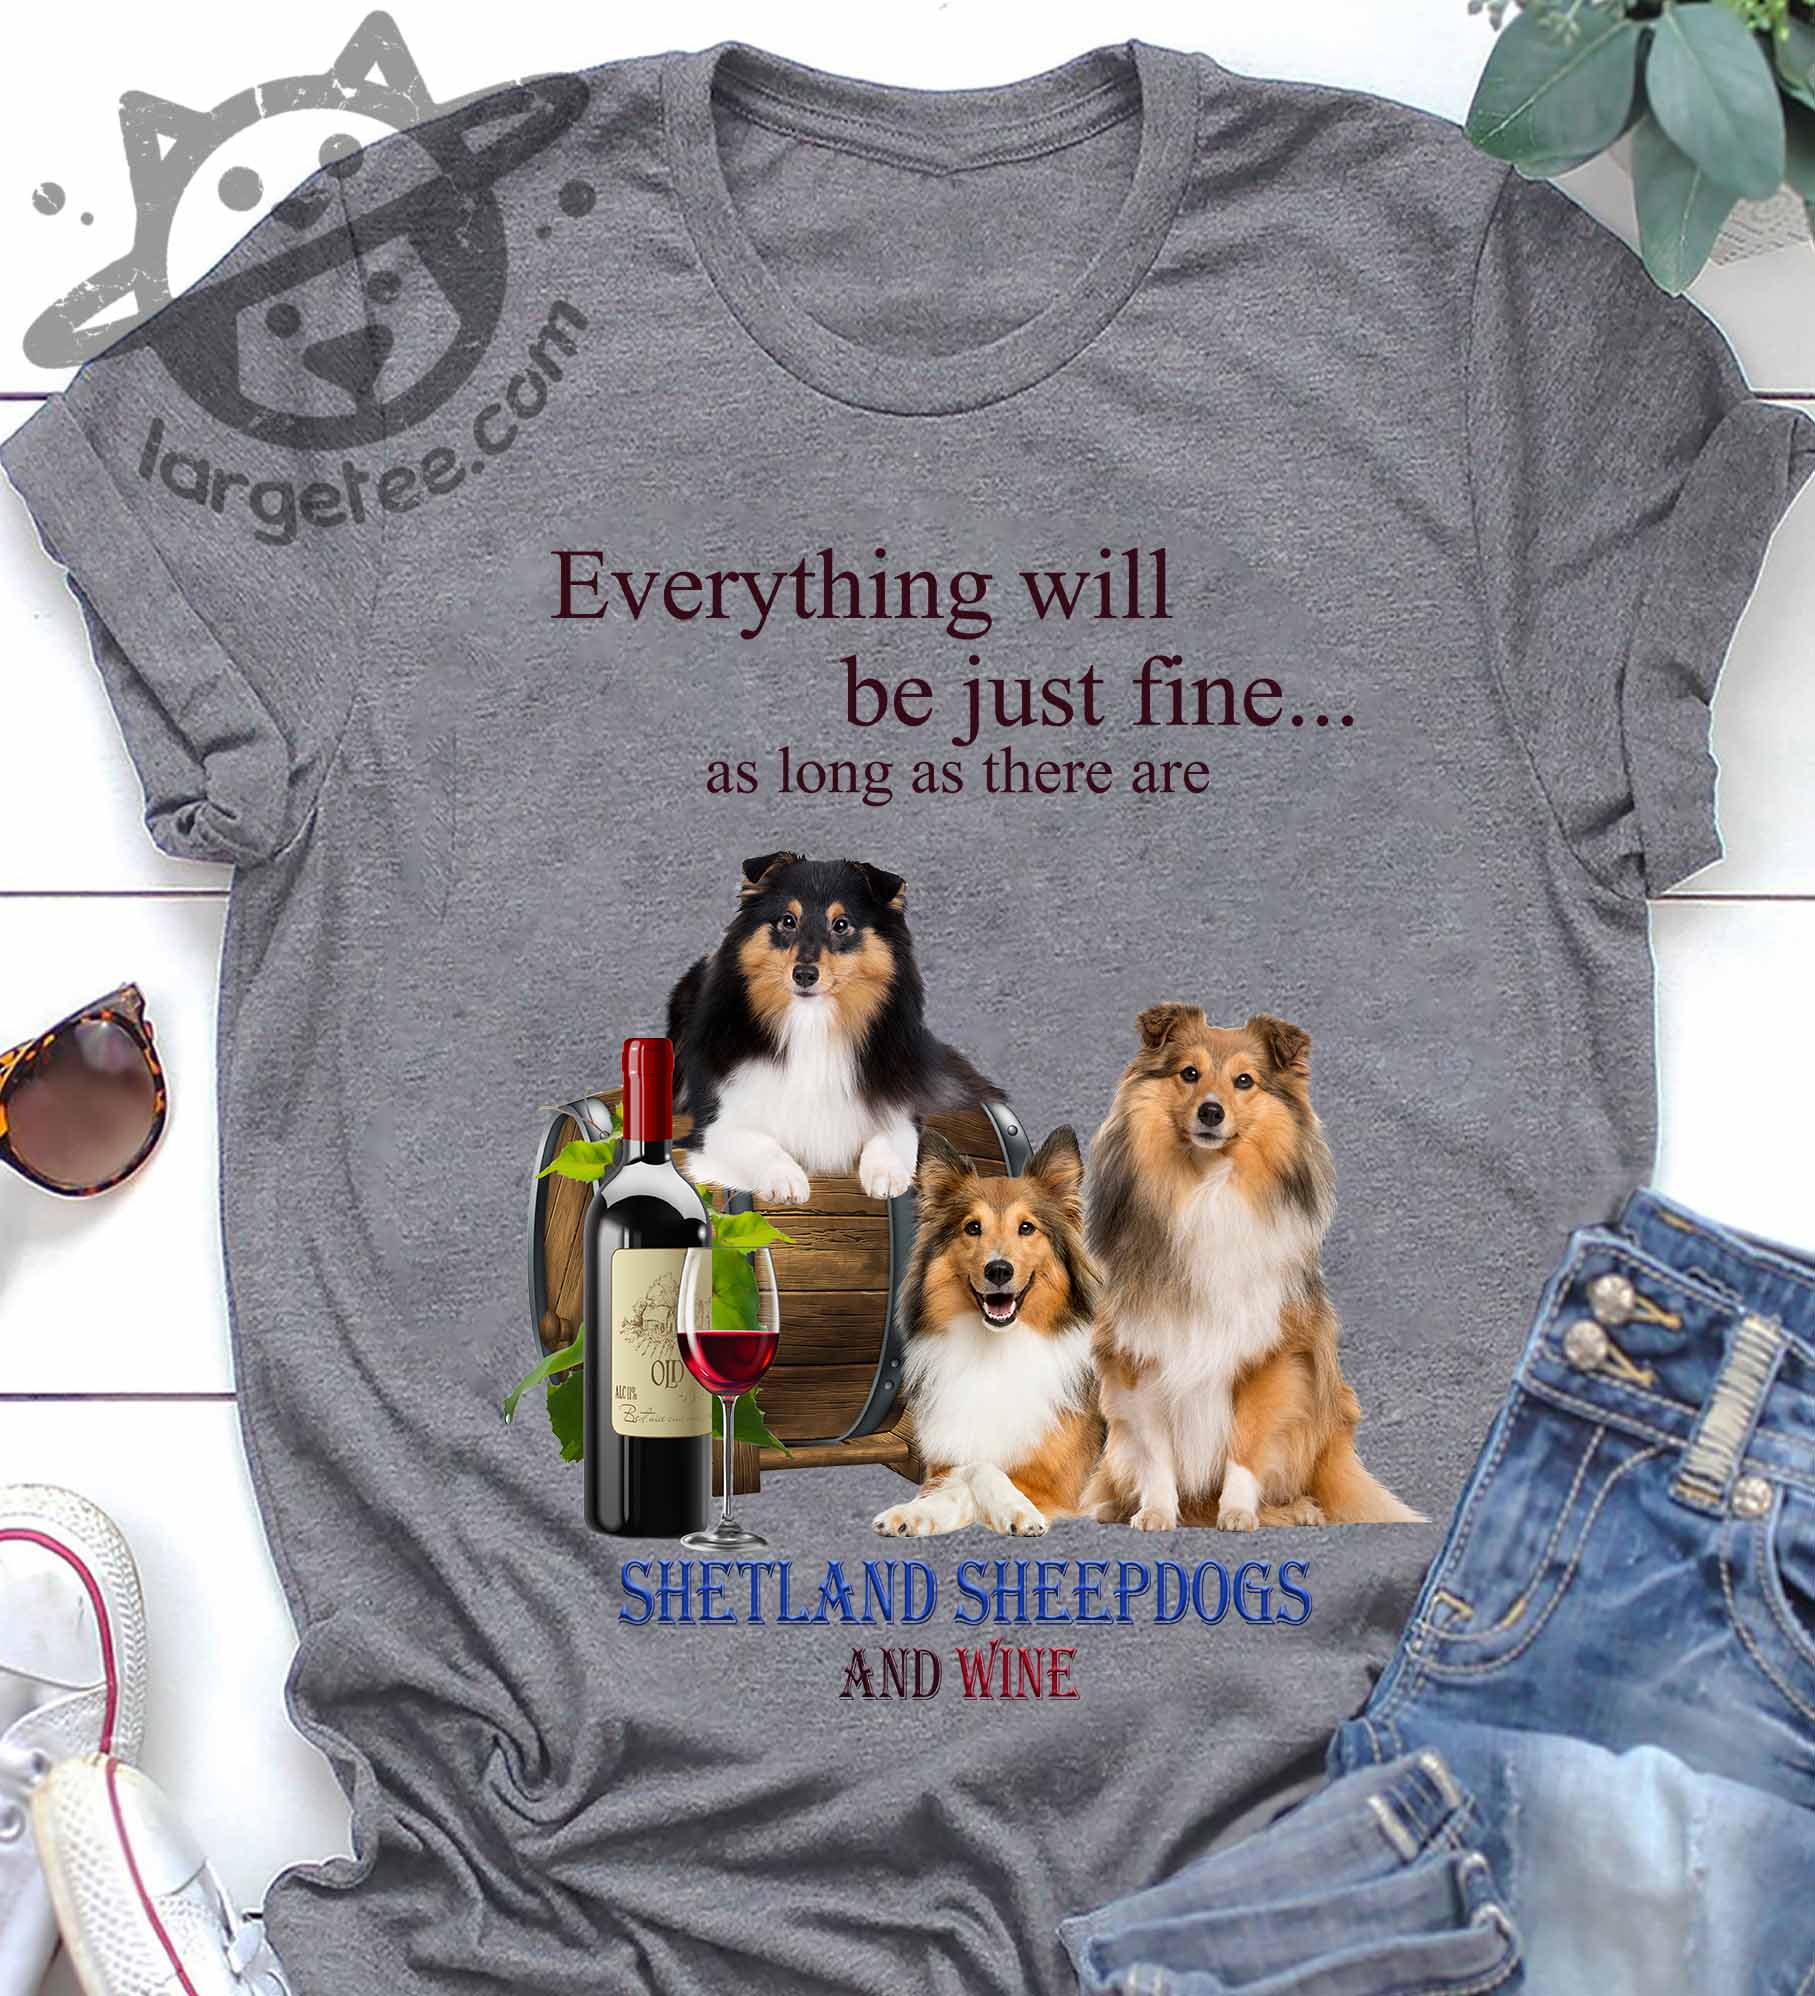 Everything will be just fine as long as there are Shetland Sheepdogs and wine